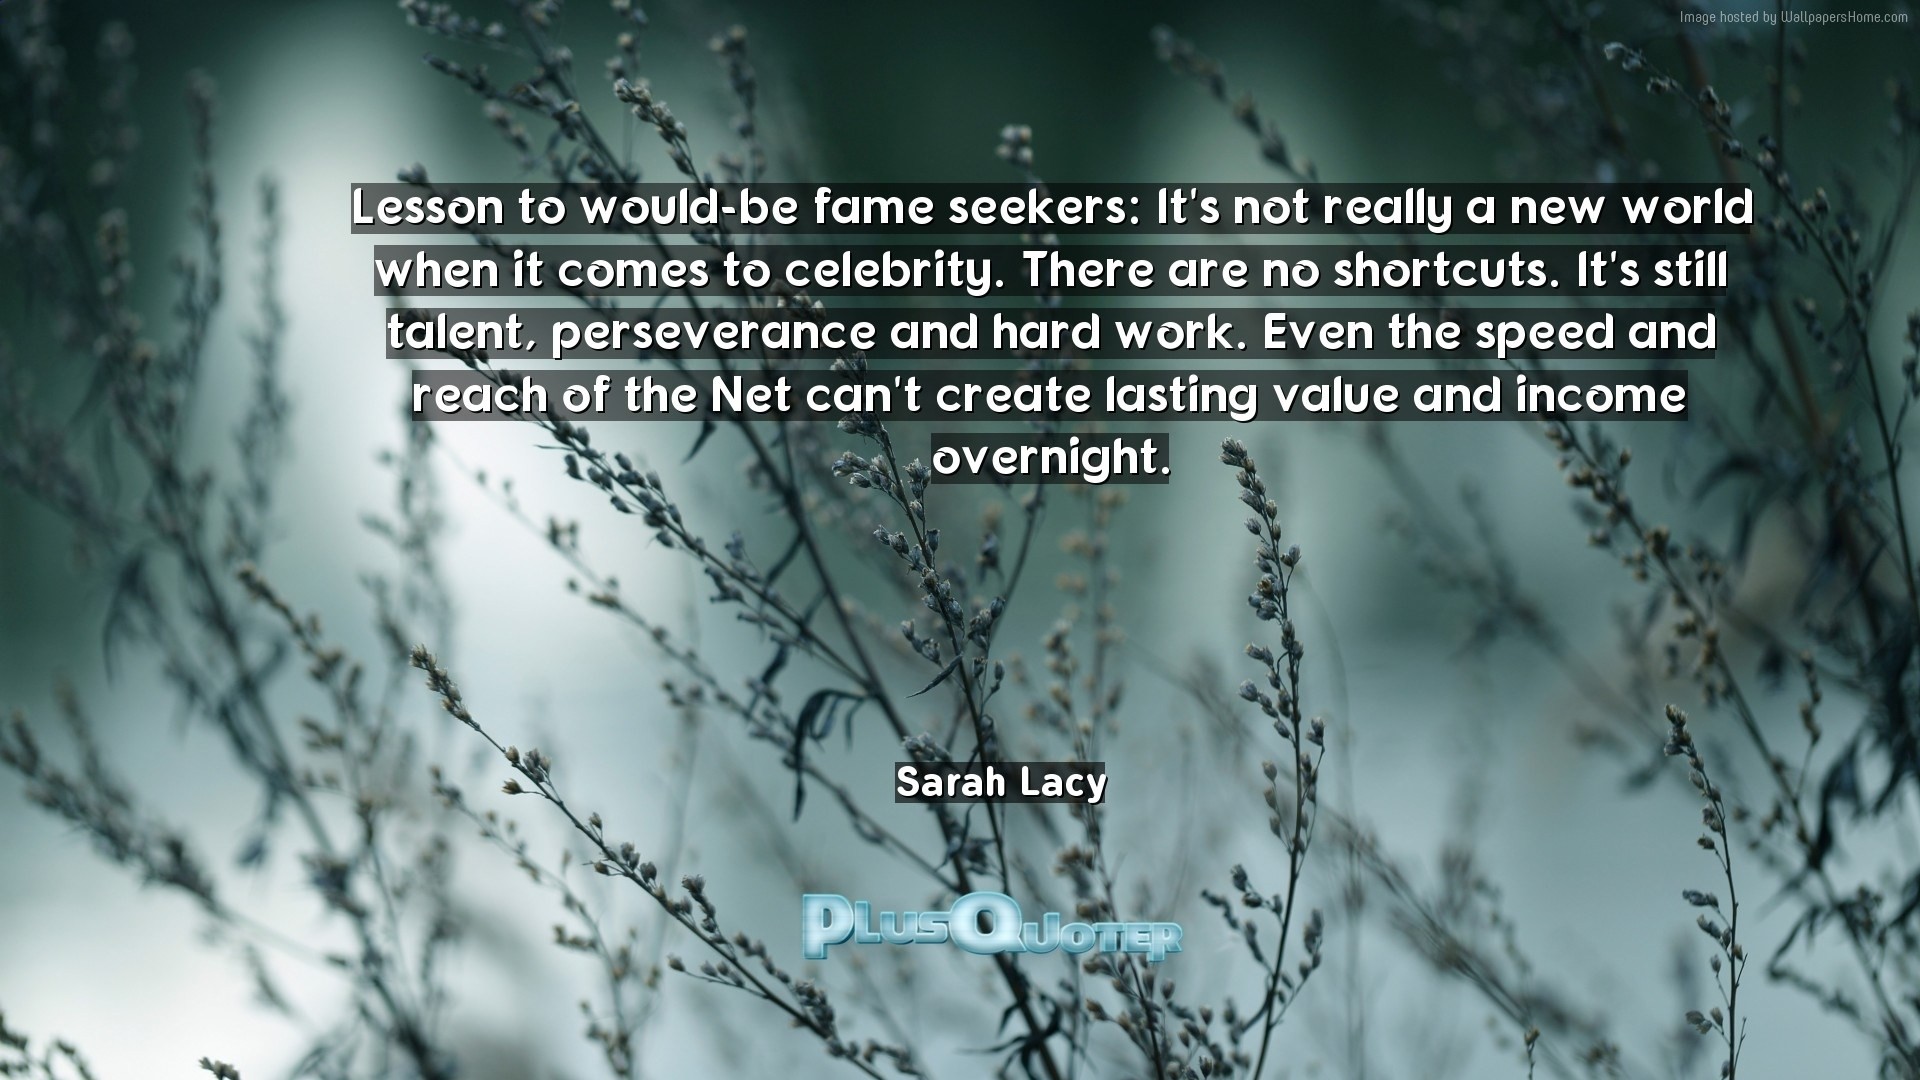 1920x1080 Download Wallpaper with inspirational Quotes- "Lesson to would-be fame  seekers: It